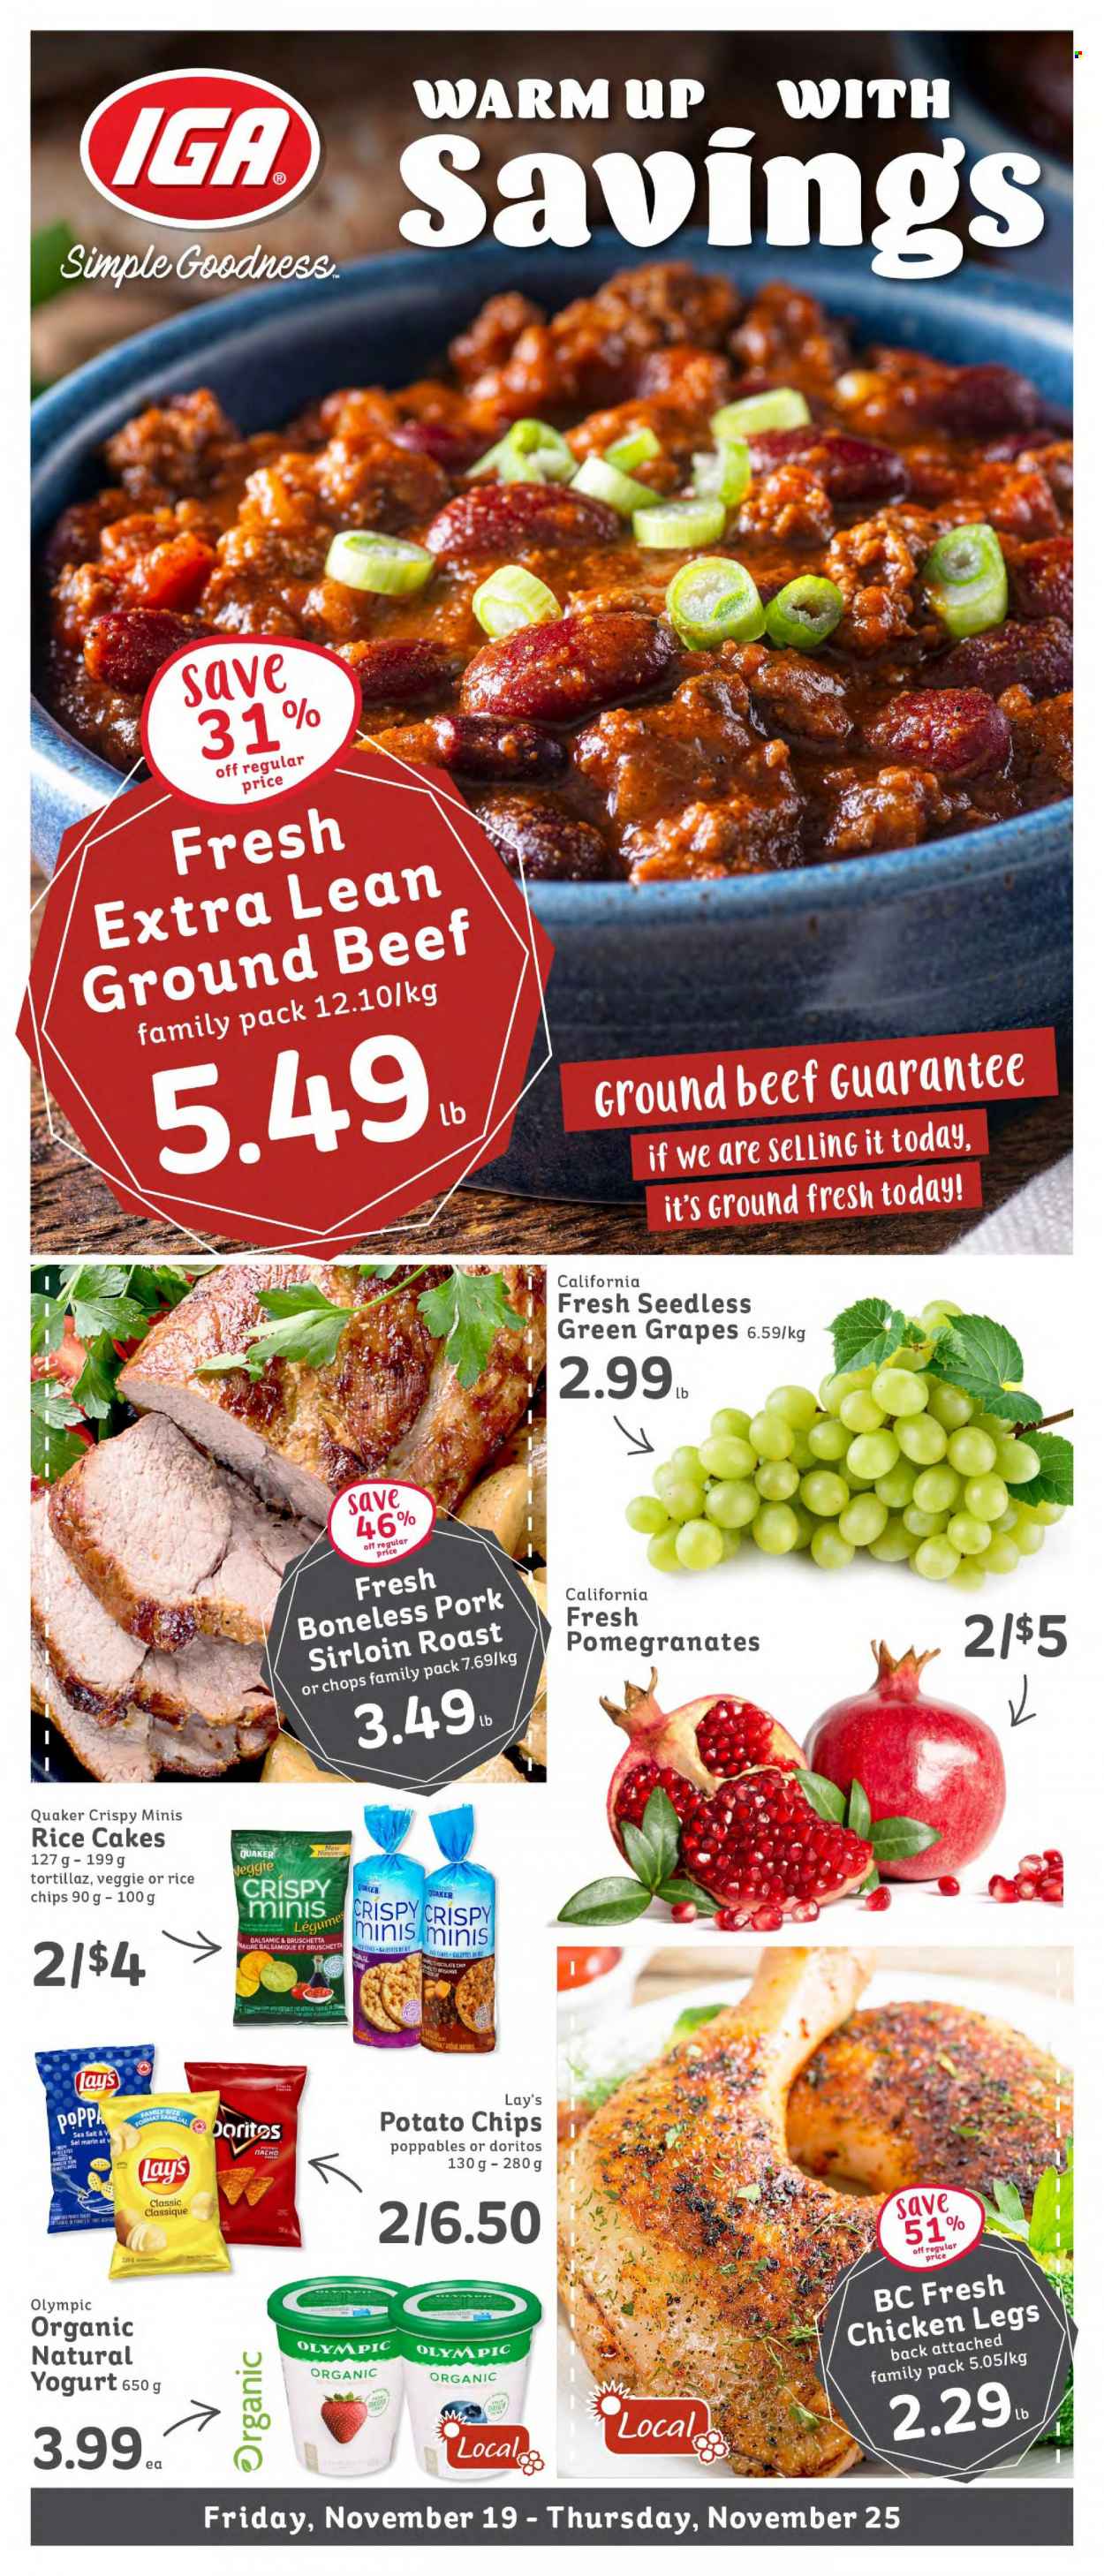 thumbnail - IGA Simple Goodness Flyer - November 19, 2021 - November 25, 2021 - Sales products - grapes, pomegranate, Quaker, bruschetta, yoghurt, Doritos, potato chips, Lay’s, chicken legs, chicken, beef meat, ground beef, pork loin, chips. Page 1.